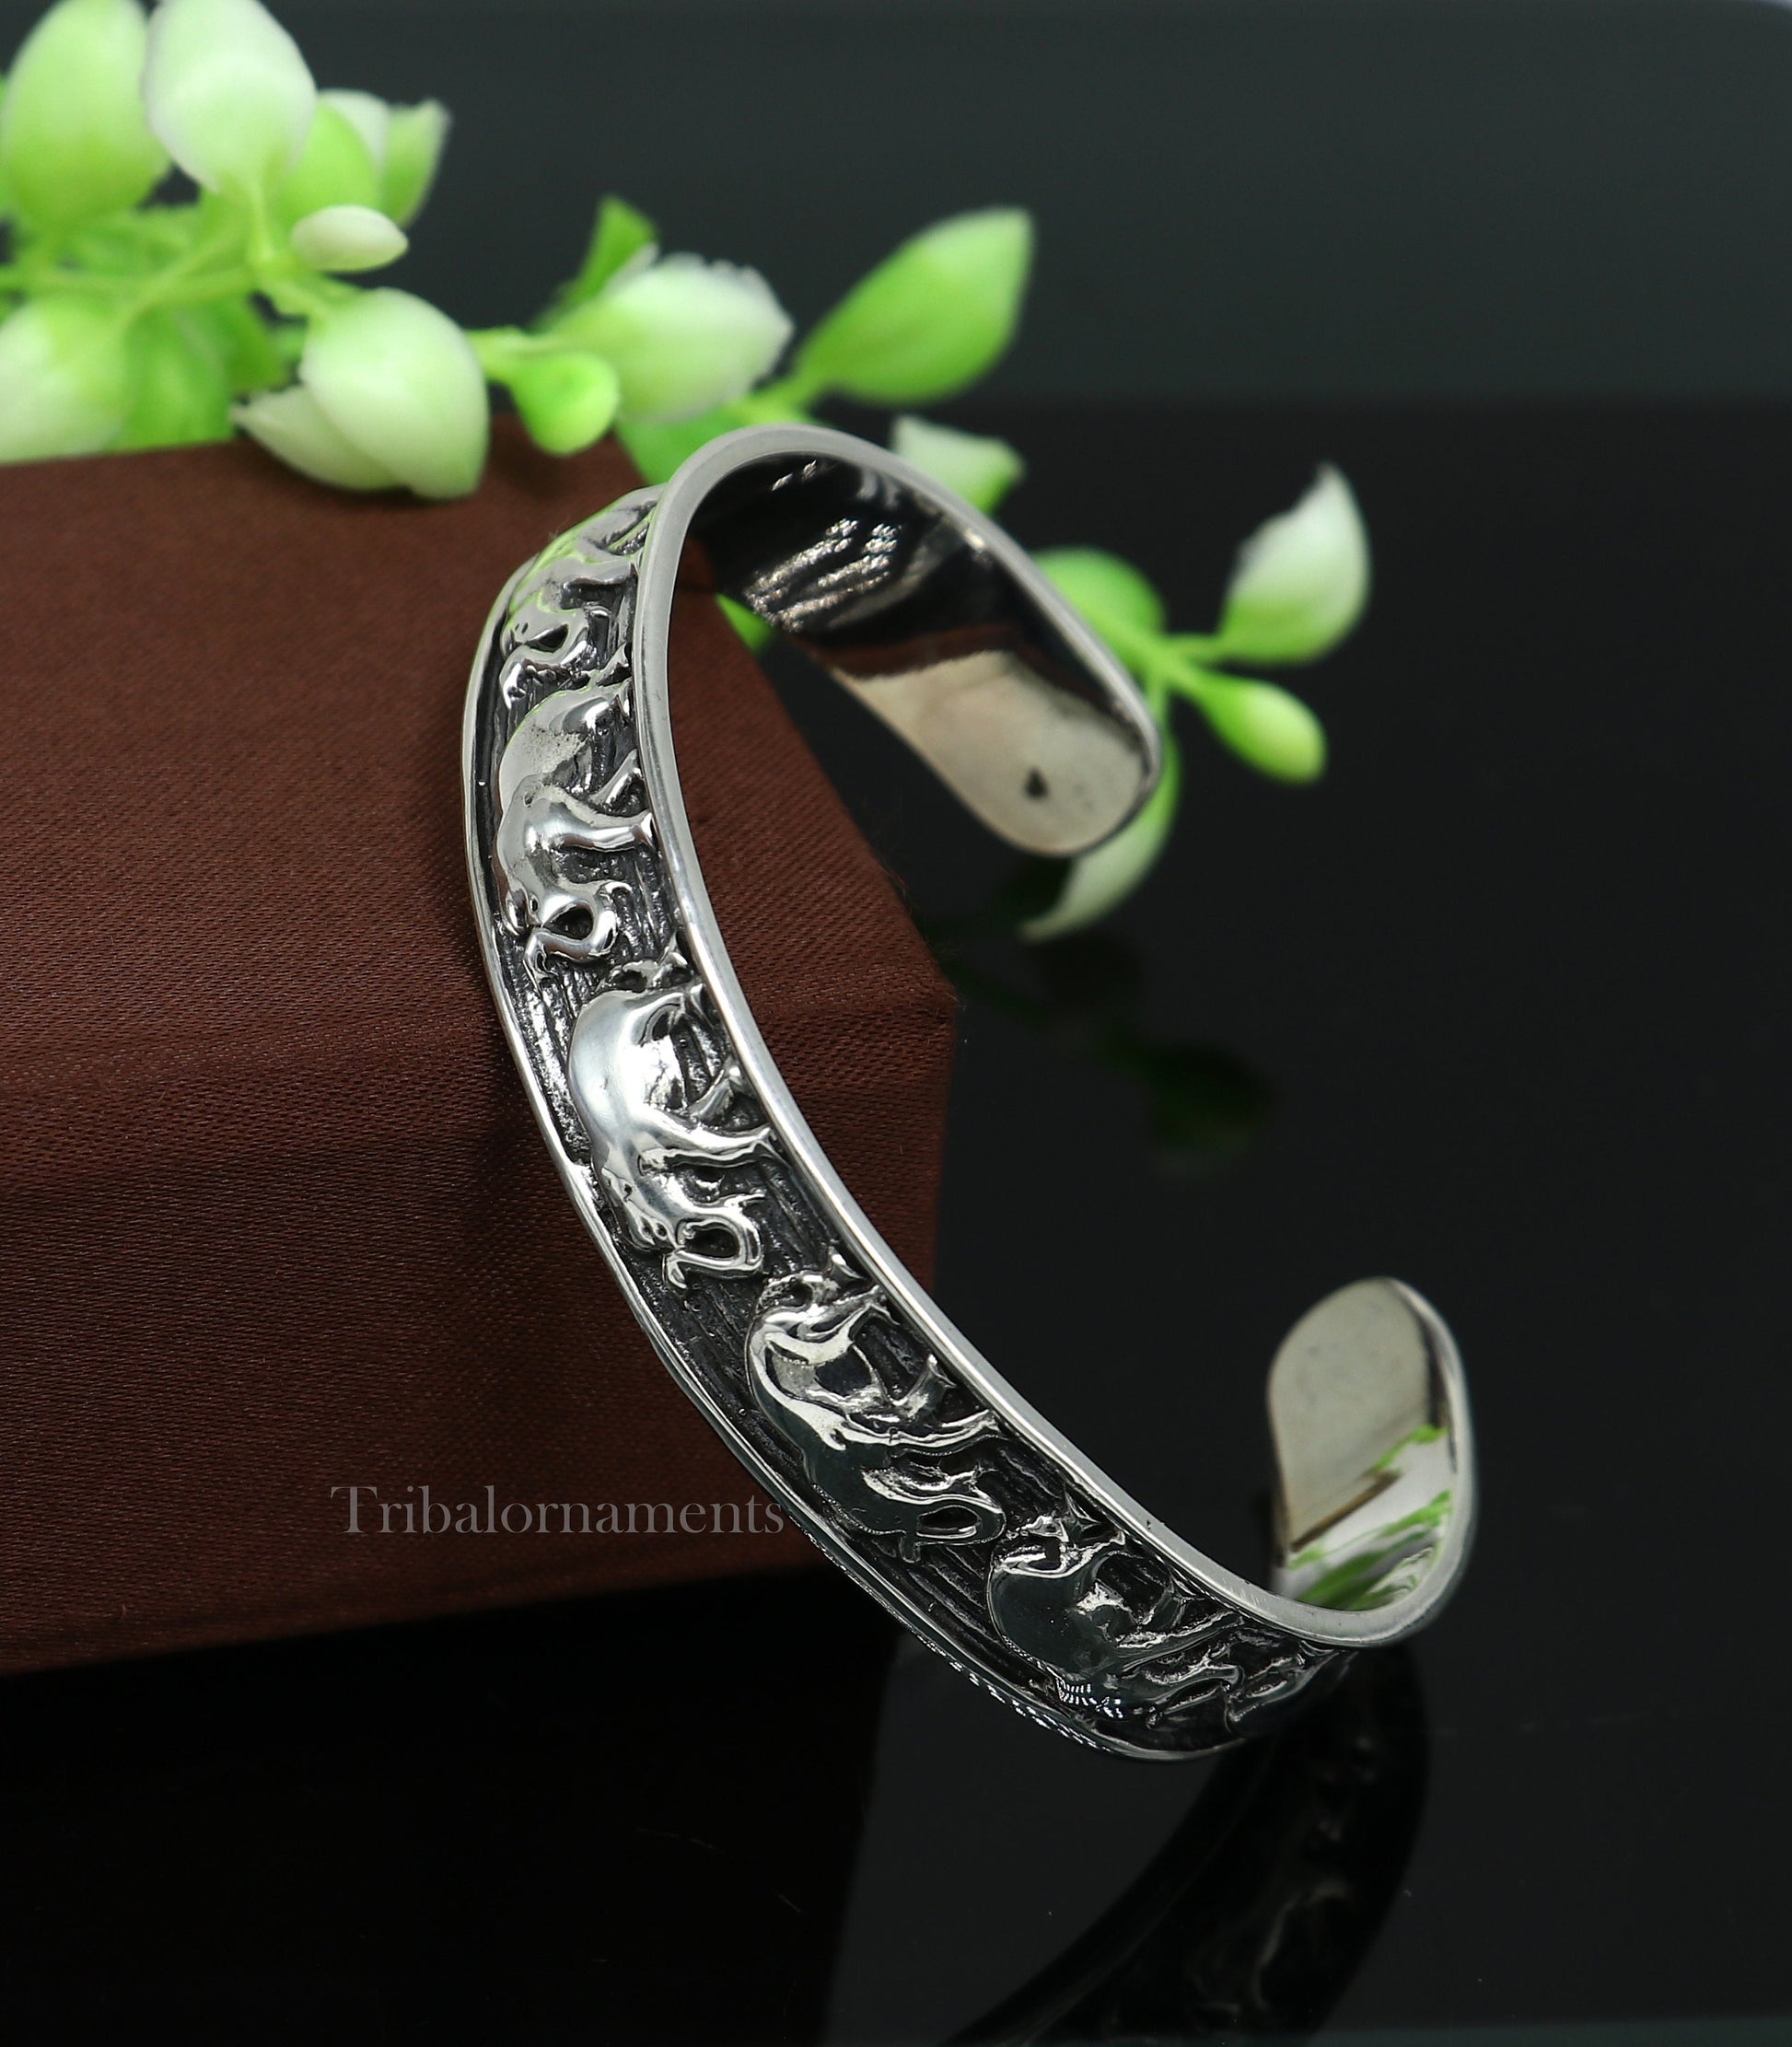 925 sterling silver unique style handcrafted adjustable elephant design cuff bangle bracelet, unisex gifting ethnic tribal jewelry nsk367 - TRIBAL ORNAMENTS